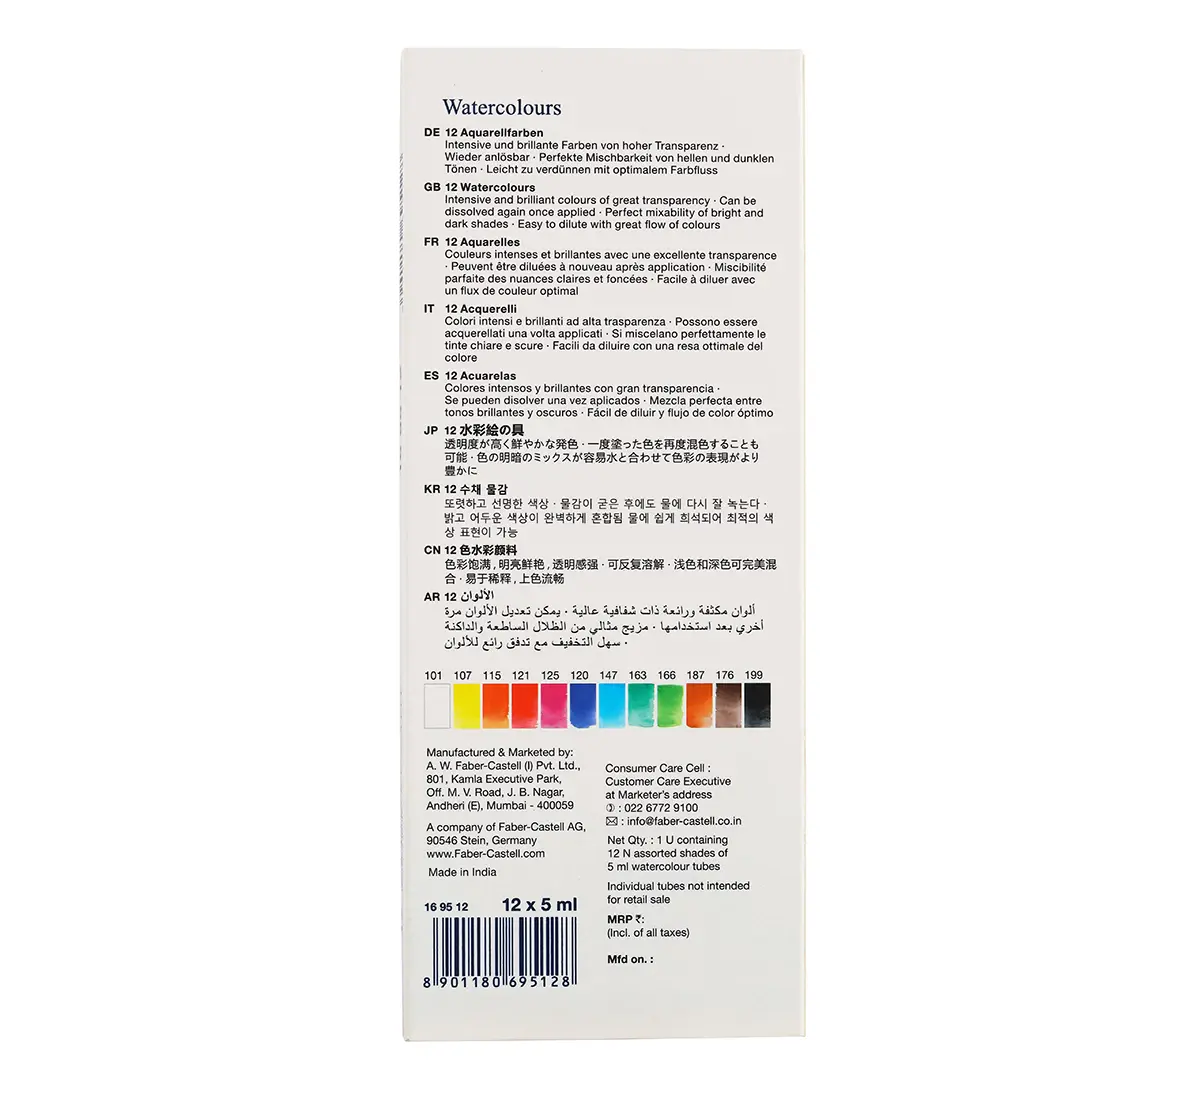 Shop Faber-Castell 1400098 student water colour in 5ml tubes ass set 6, 8Y+